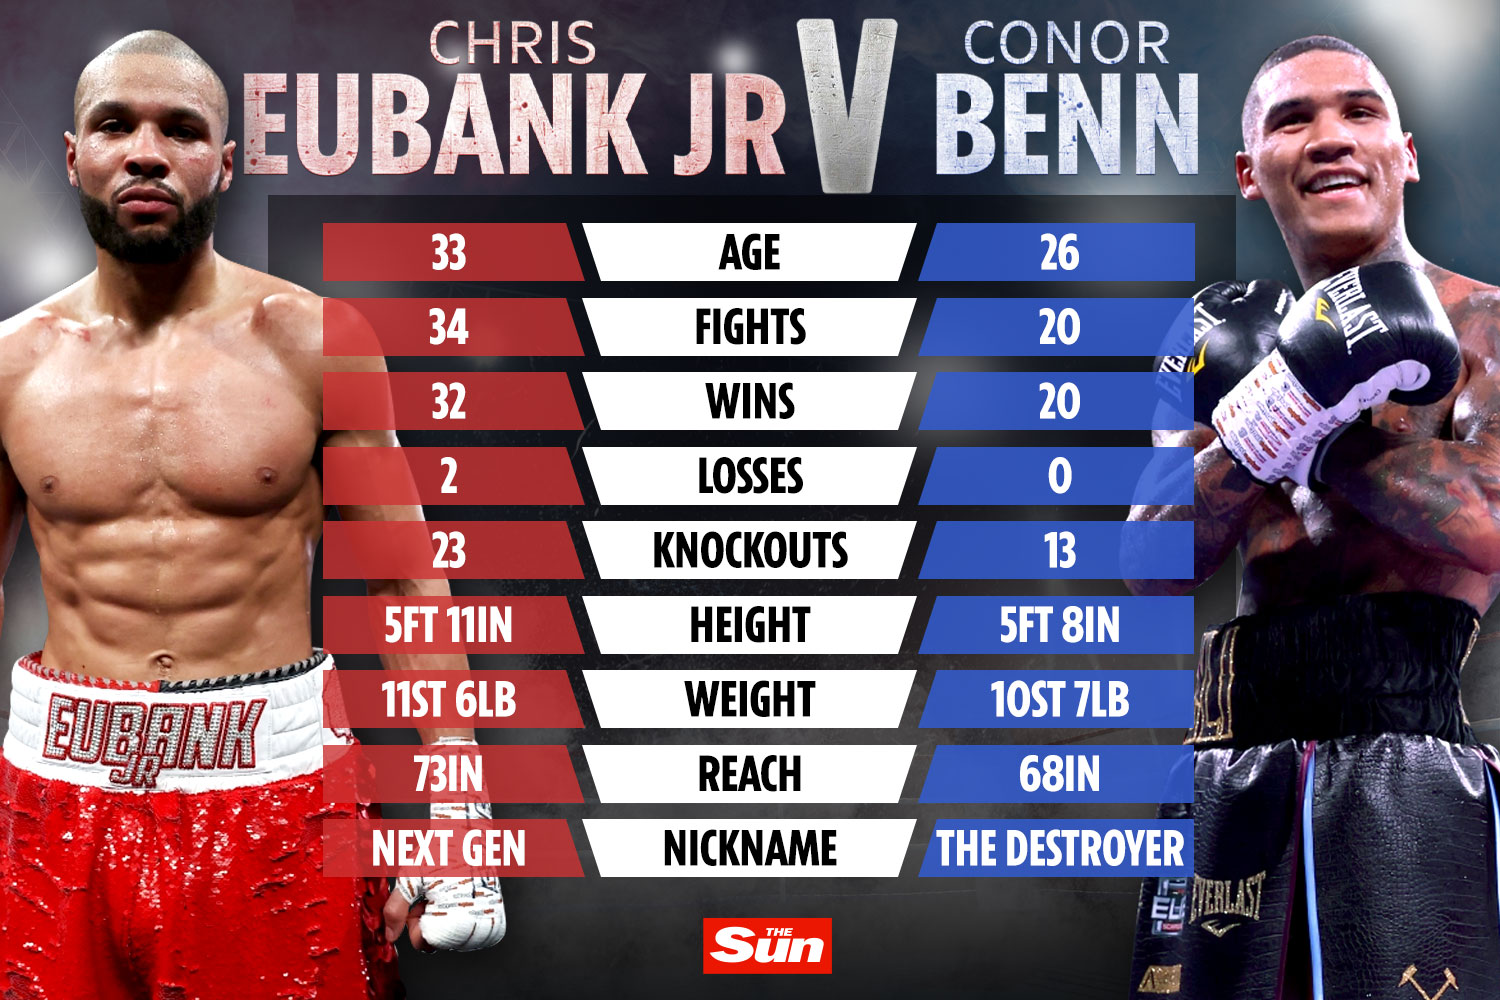 , Chris Eubank Jr has trained HIMSELF for Conor Benn grudge match after dad snubbed coaching role and wanted fight axed